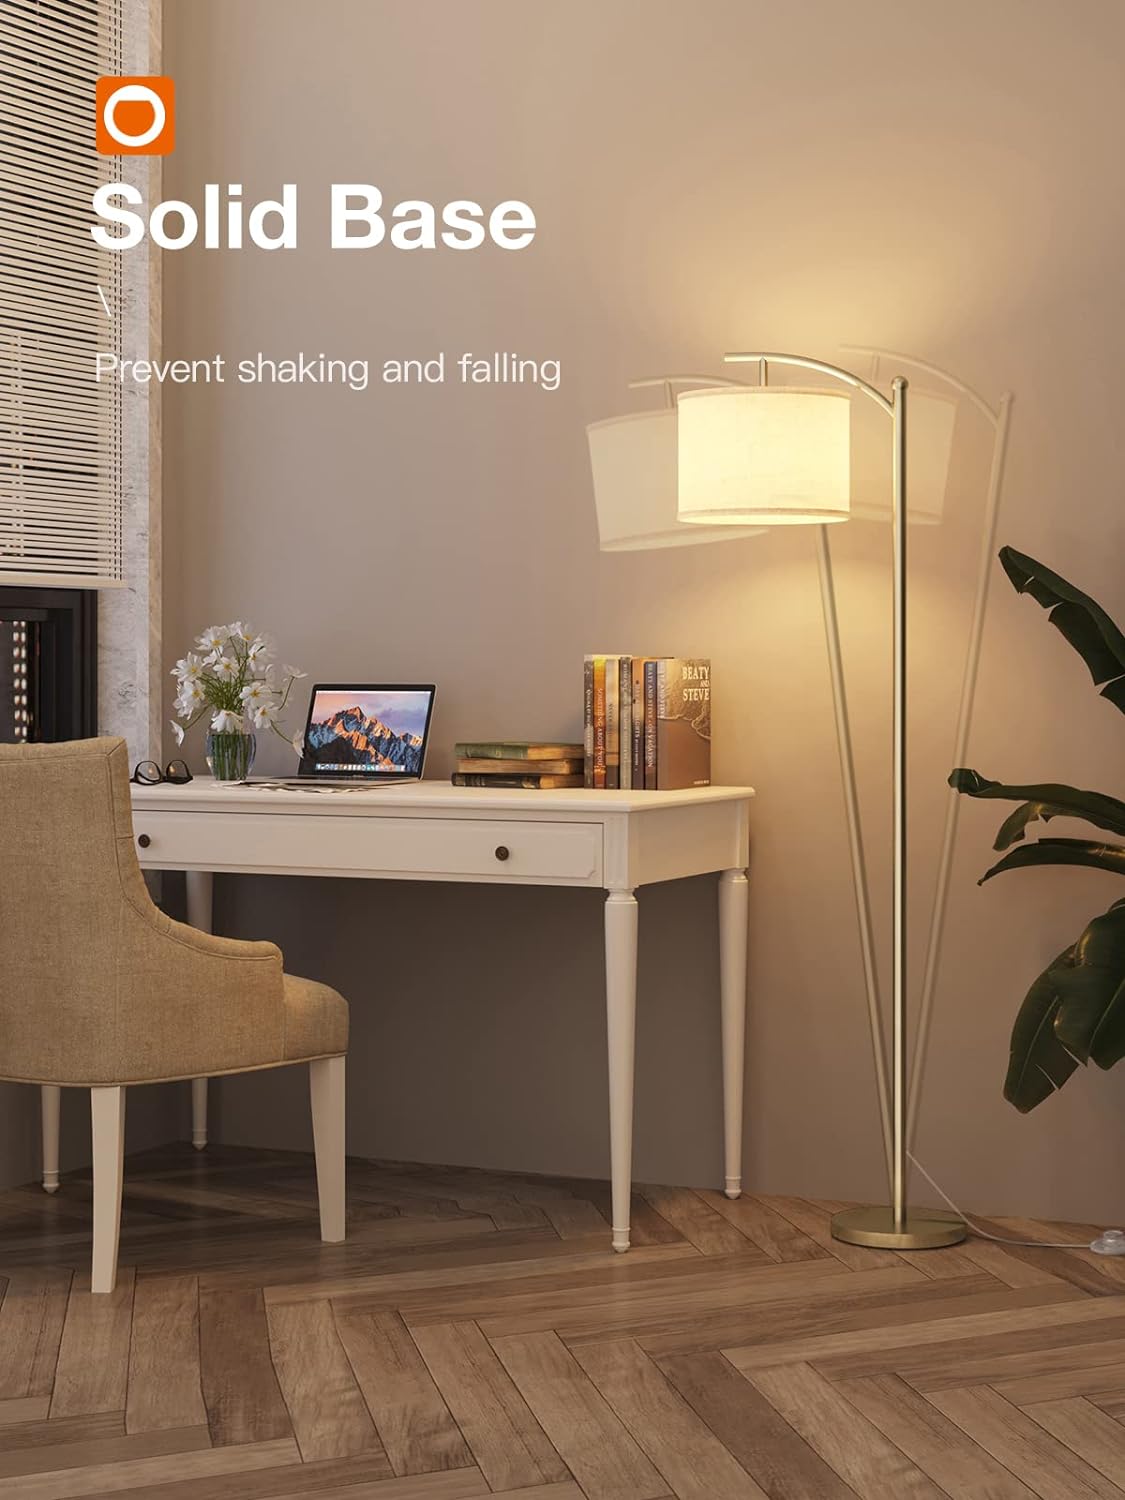 addlon Floor Lamp for Living Room with 3 Color Temperatures, Standing lamp with Linen lampshade for Bedroom, Office, Lamps with 9W LED Bulb Included - Brass Gold with Beige Shade